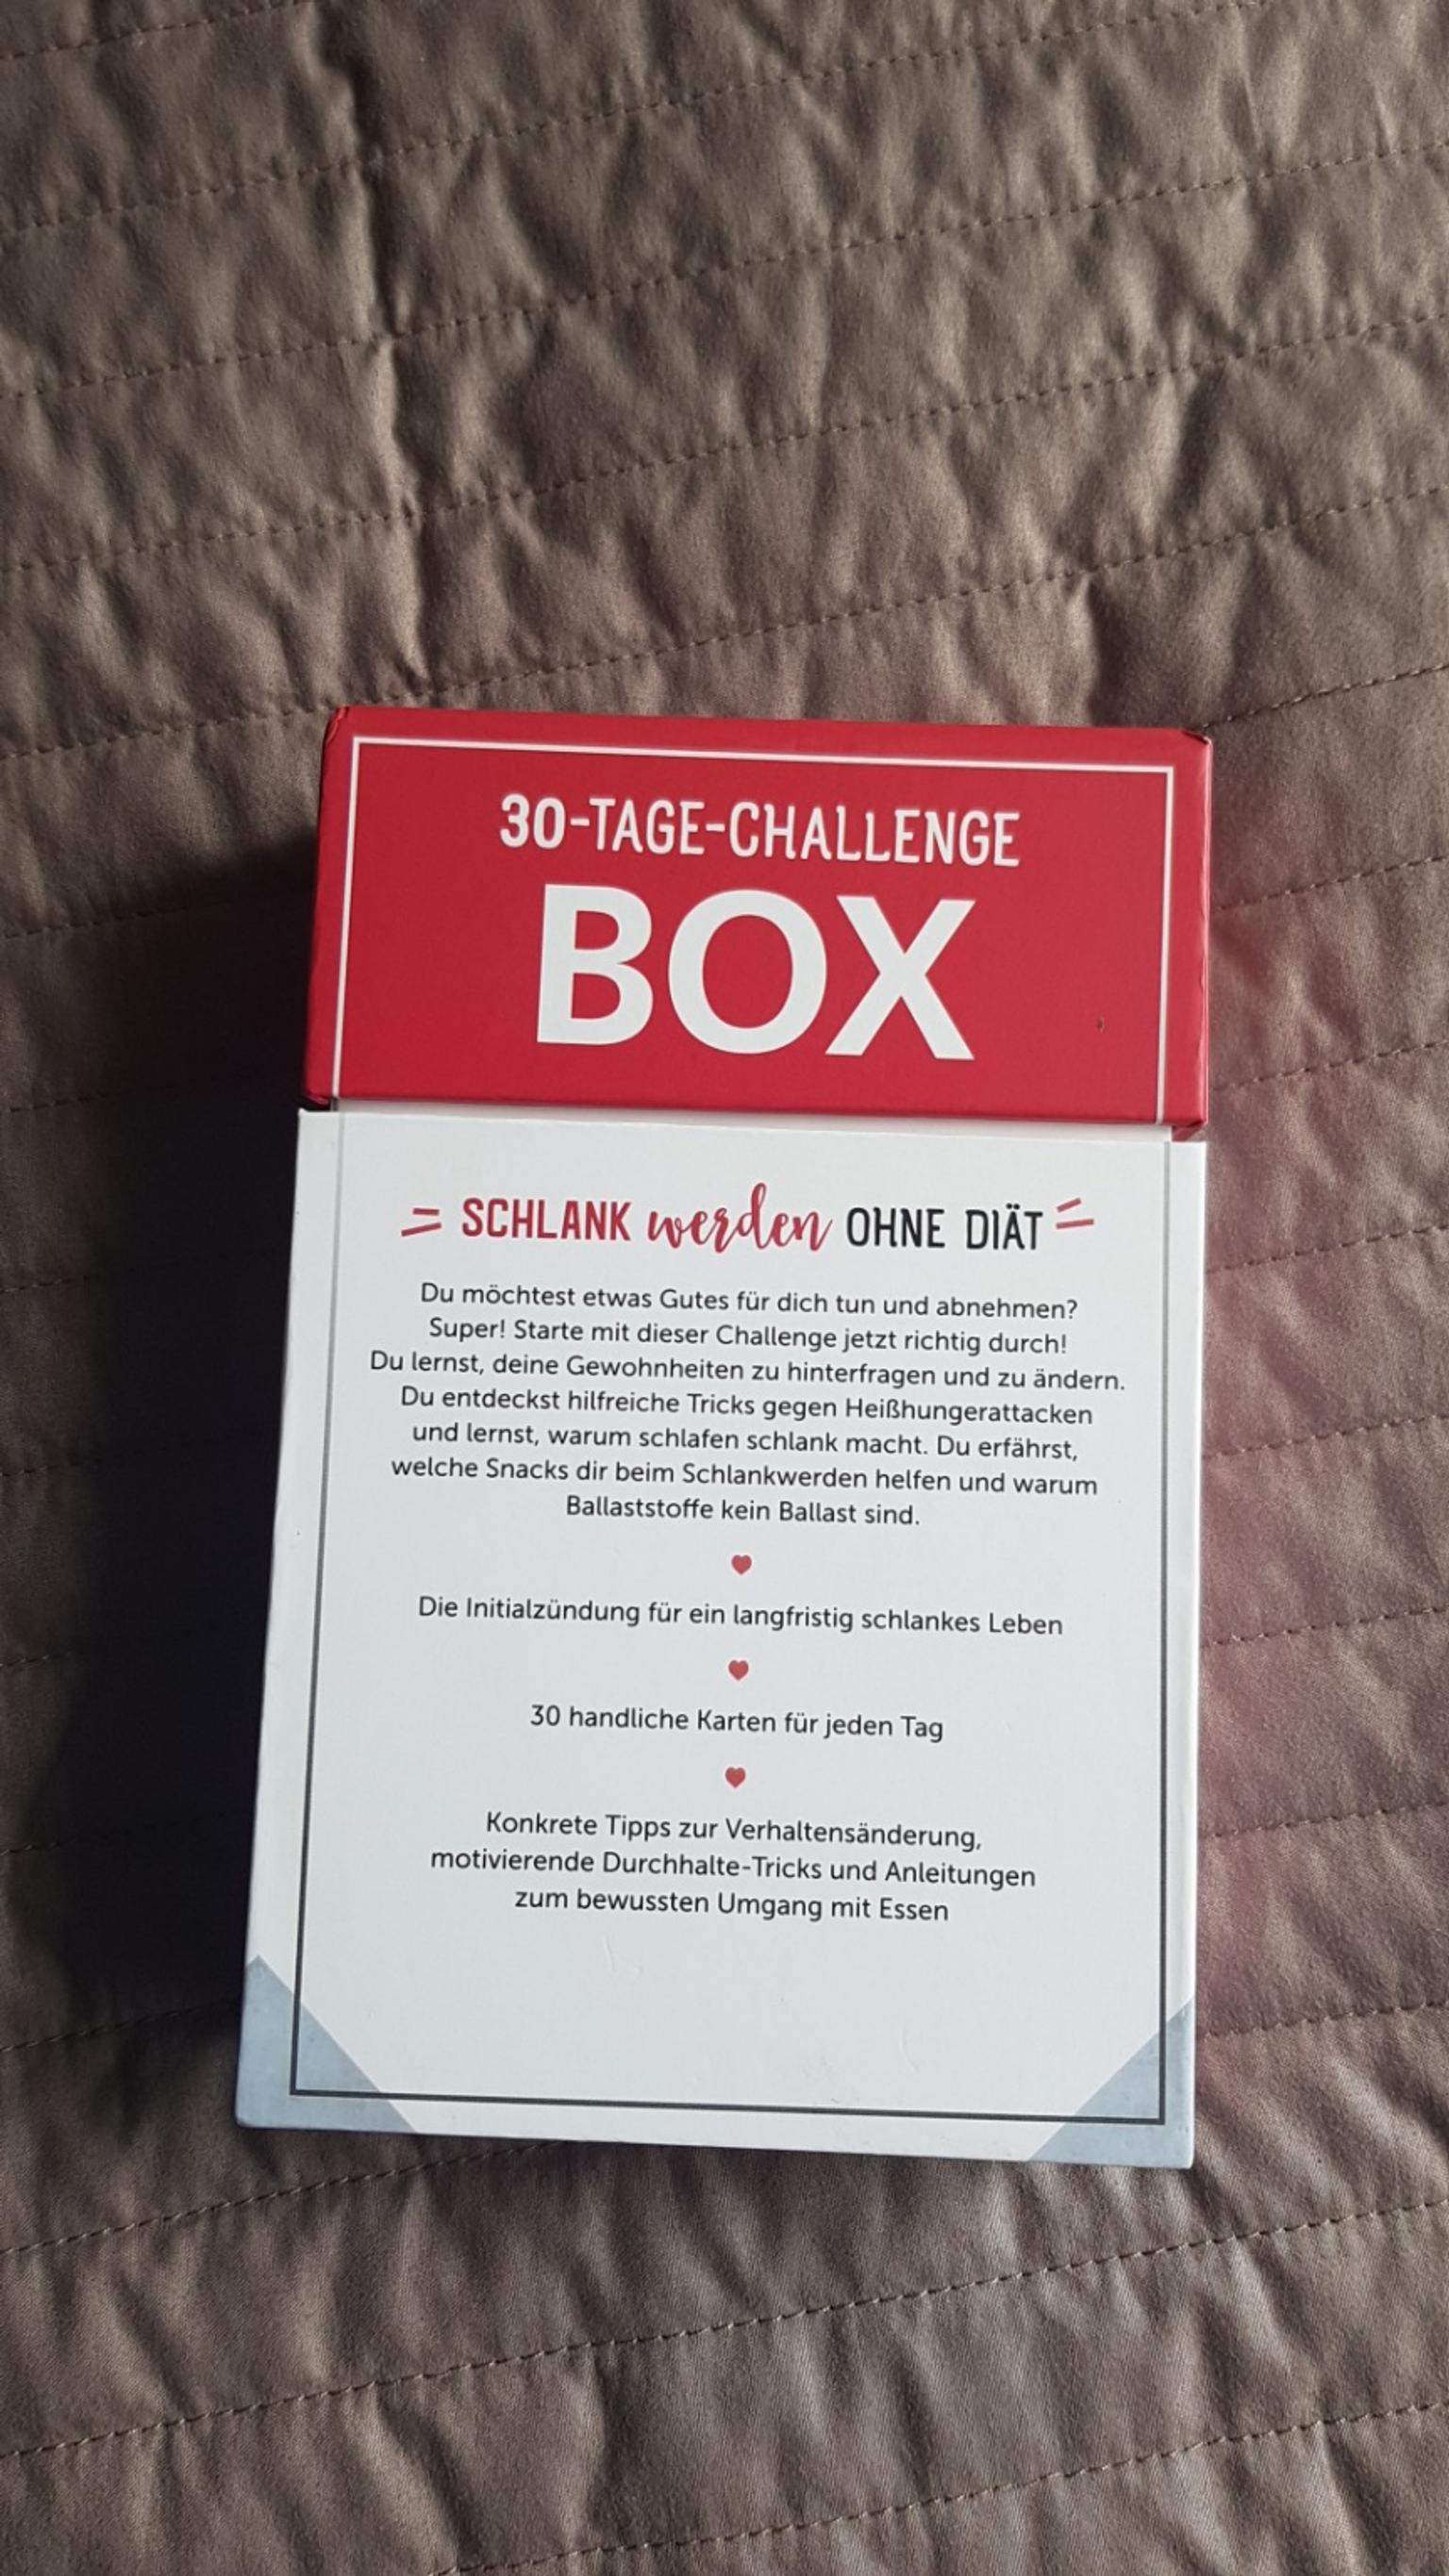 Abnehmen Box 30 Tage Challenge In 74080 Heilbronn For 10 00 For Sale Shpock